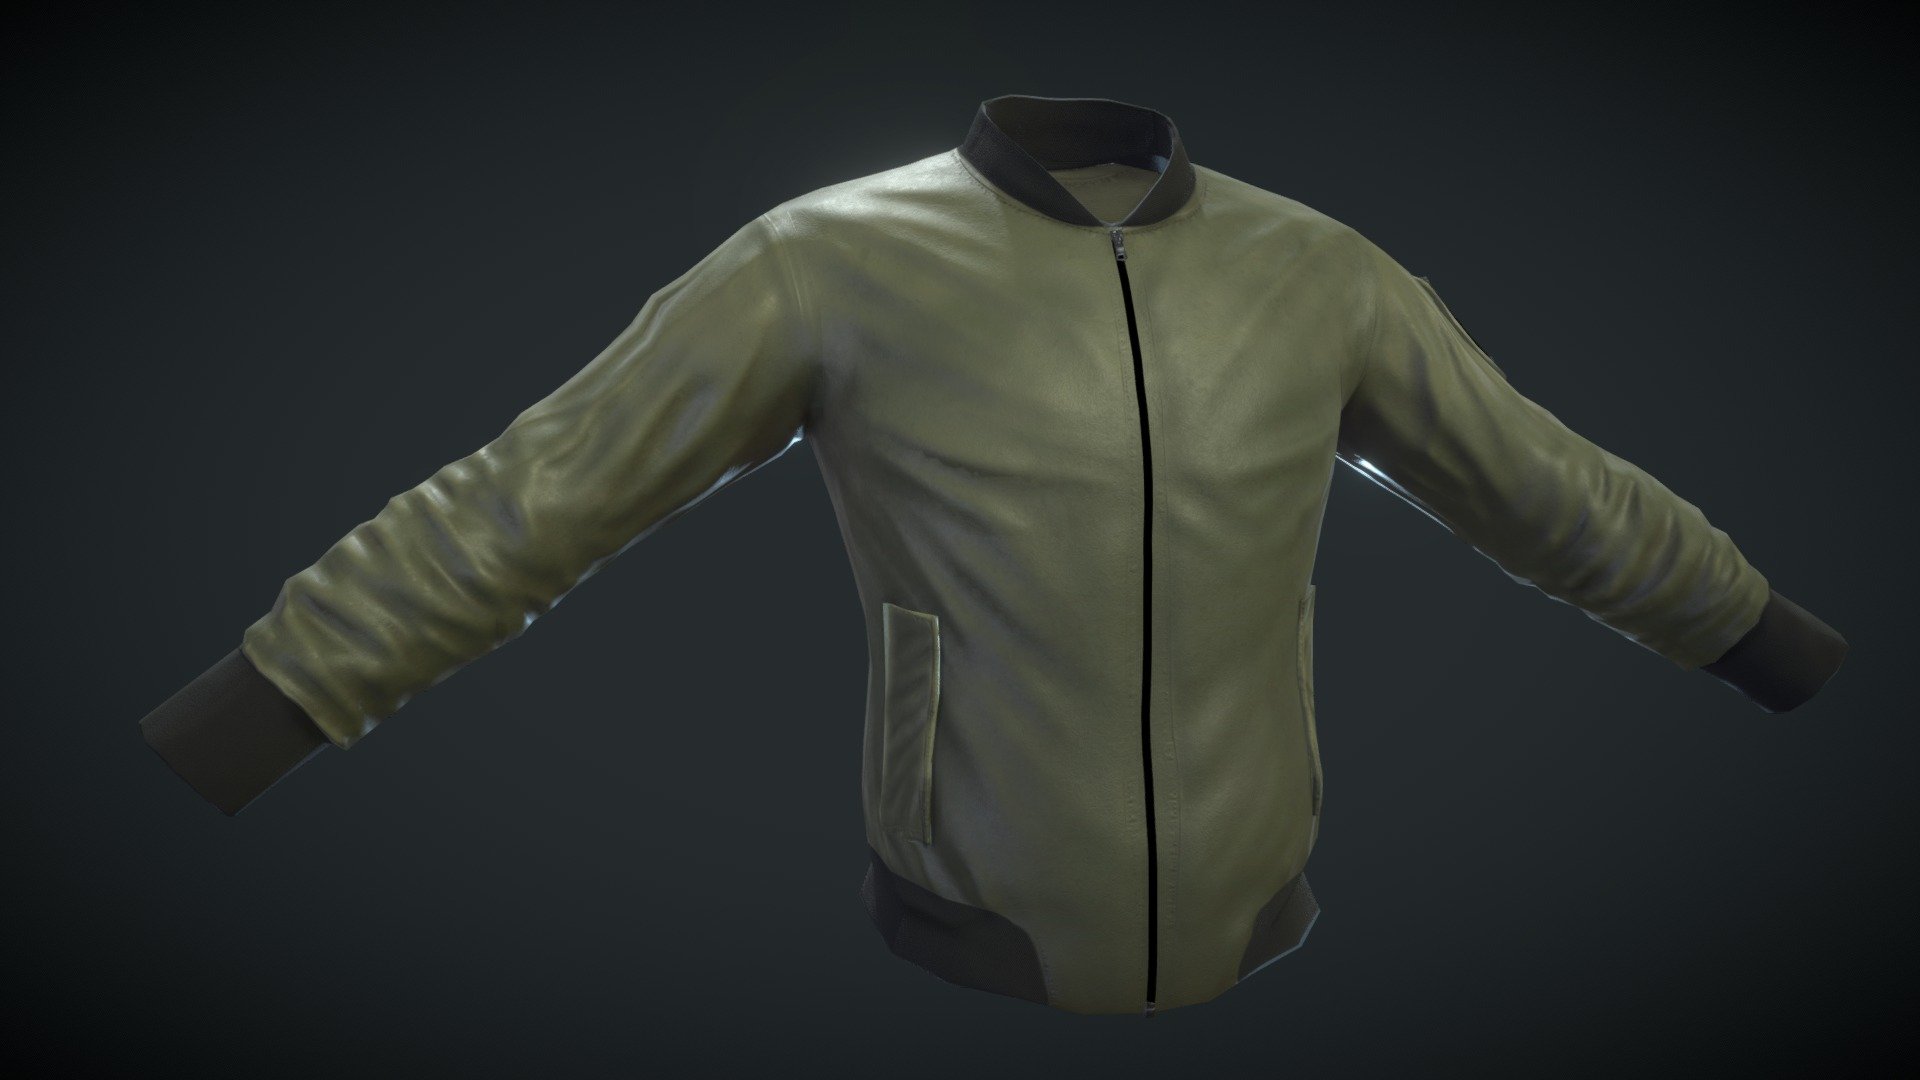 Process

This is a game-res model created in Maya with a high-res normal map baked in substance painter. The materials were made using a PBR workflow to create the textures and all other maps present within the model.

Programs Utilized

Modeled in Maya

Textured in Substance Painter 

**
Credit**

Mauricio Guerra Perdomo: Models and materials - Bomber Jacket - 3D model by Mauricio Perdomo (@MauricioPerdomo) 3d model